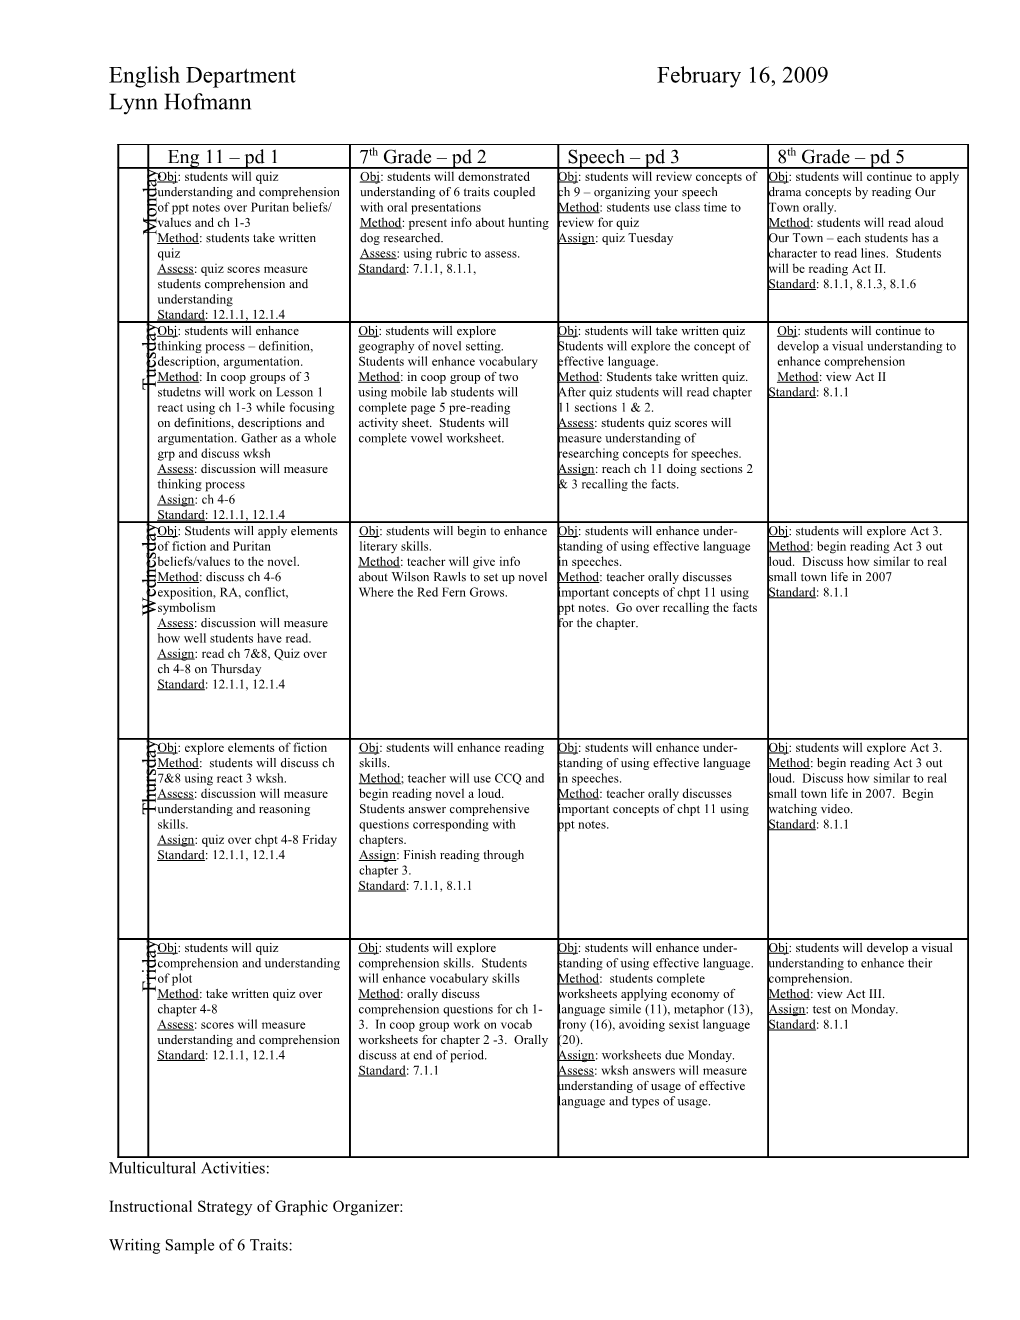 Instructional Strategy of Graphic Organizer